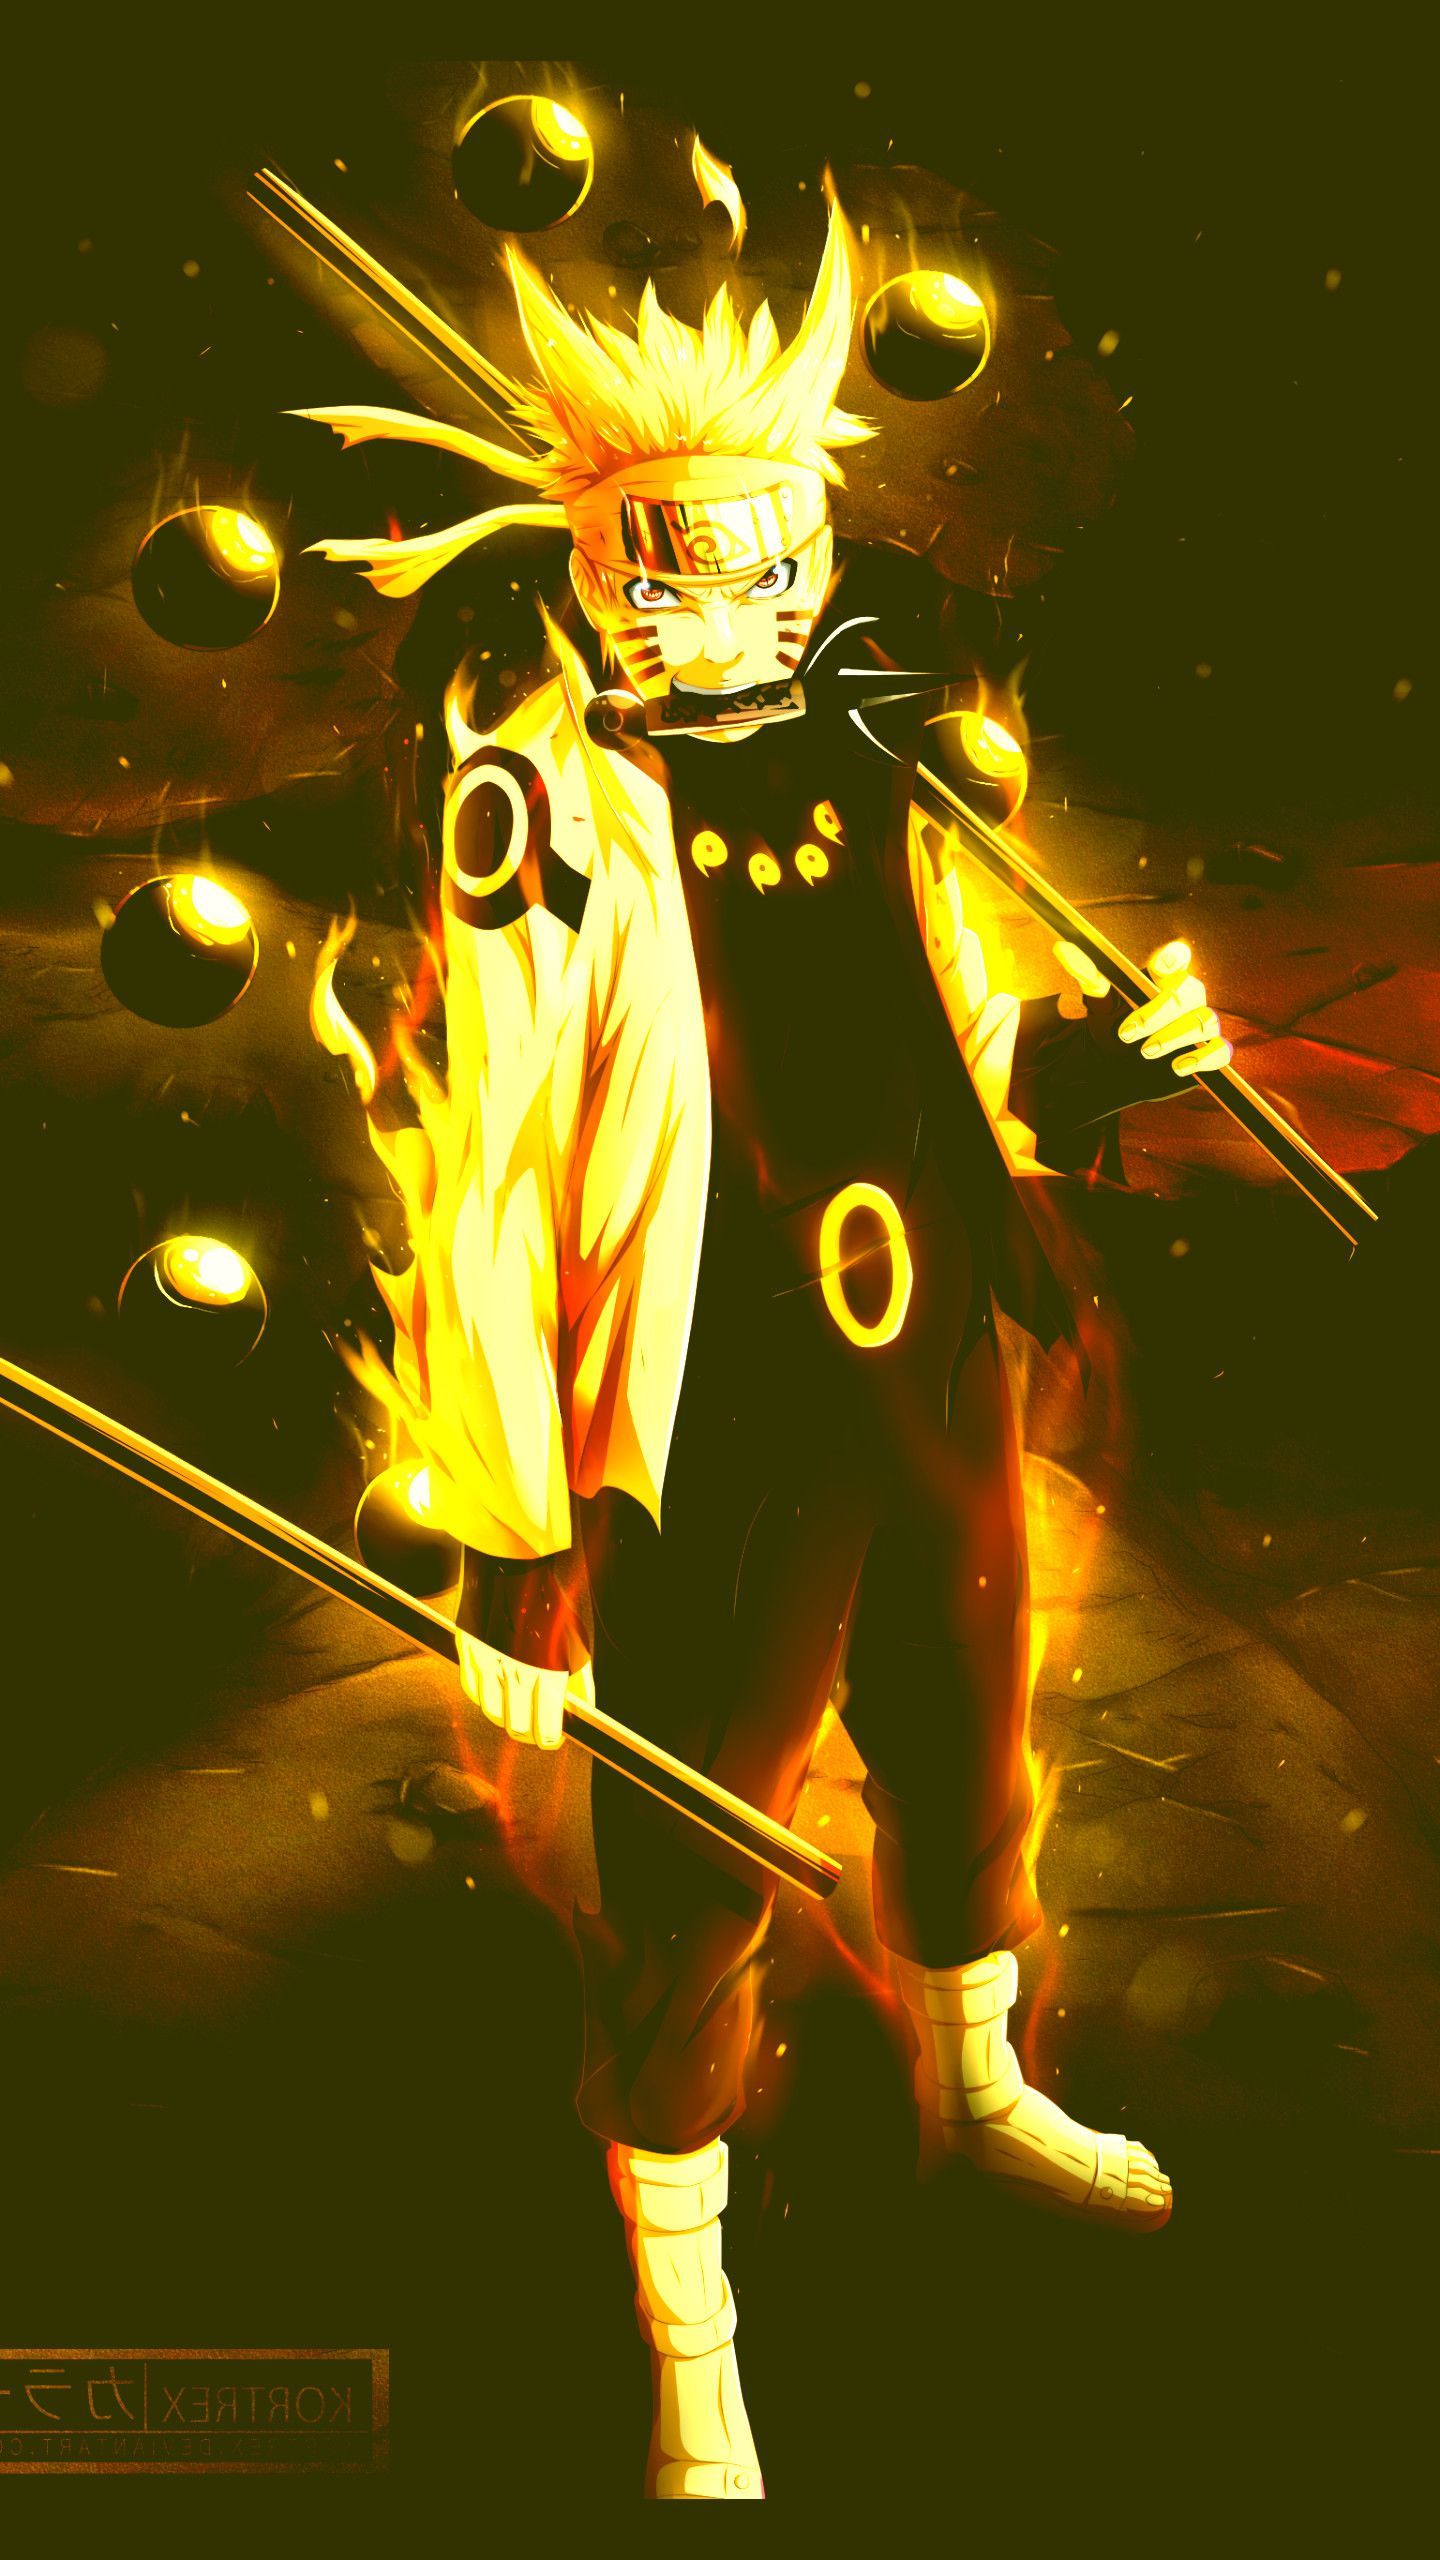 Naruto Live Iphone Xr Wallpapers